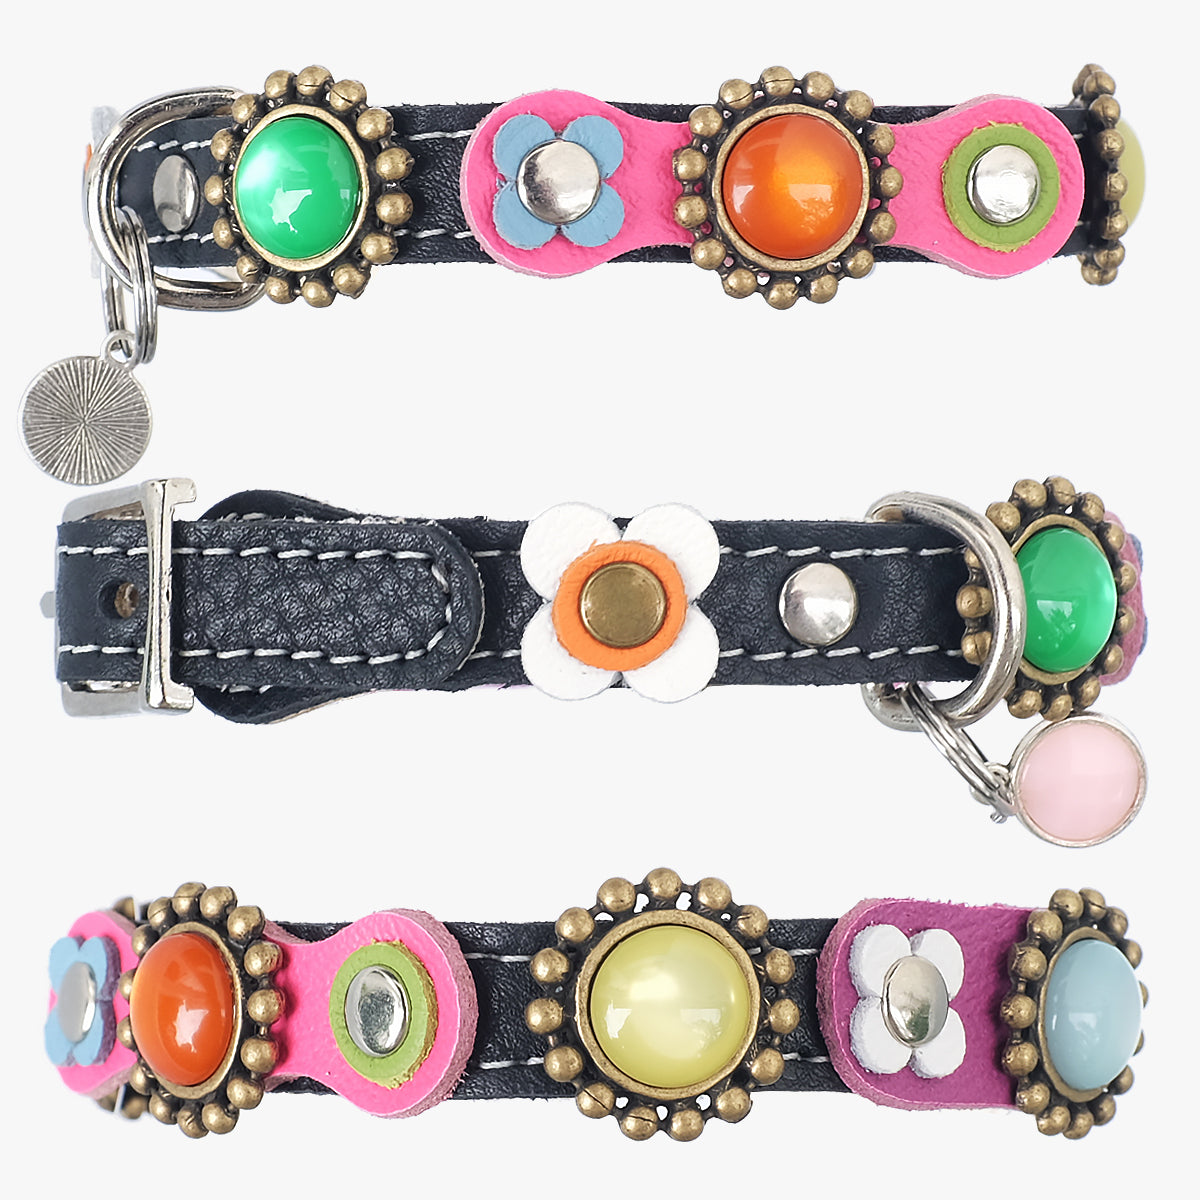 Superpipapo Luxury Leather Cat Collar, In Black With Stones, & Flower Patches | at Made Moggie